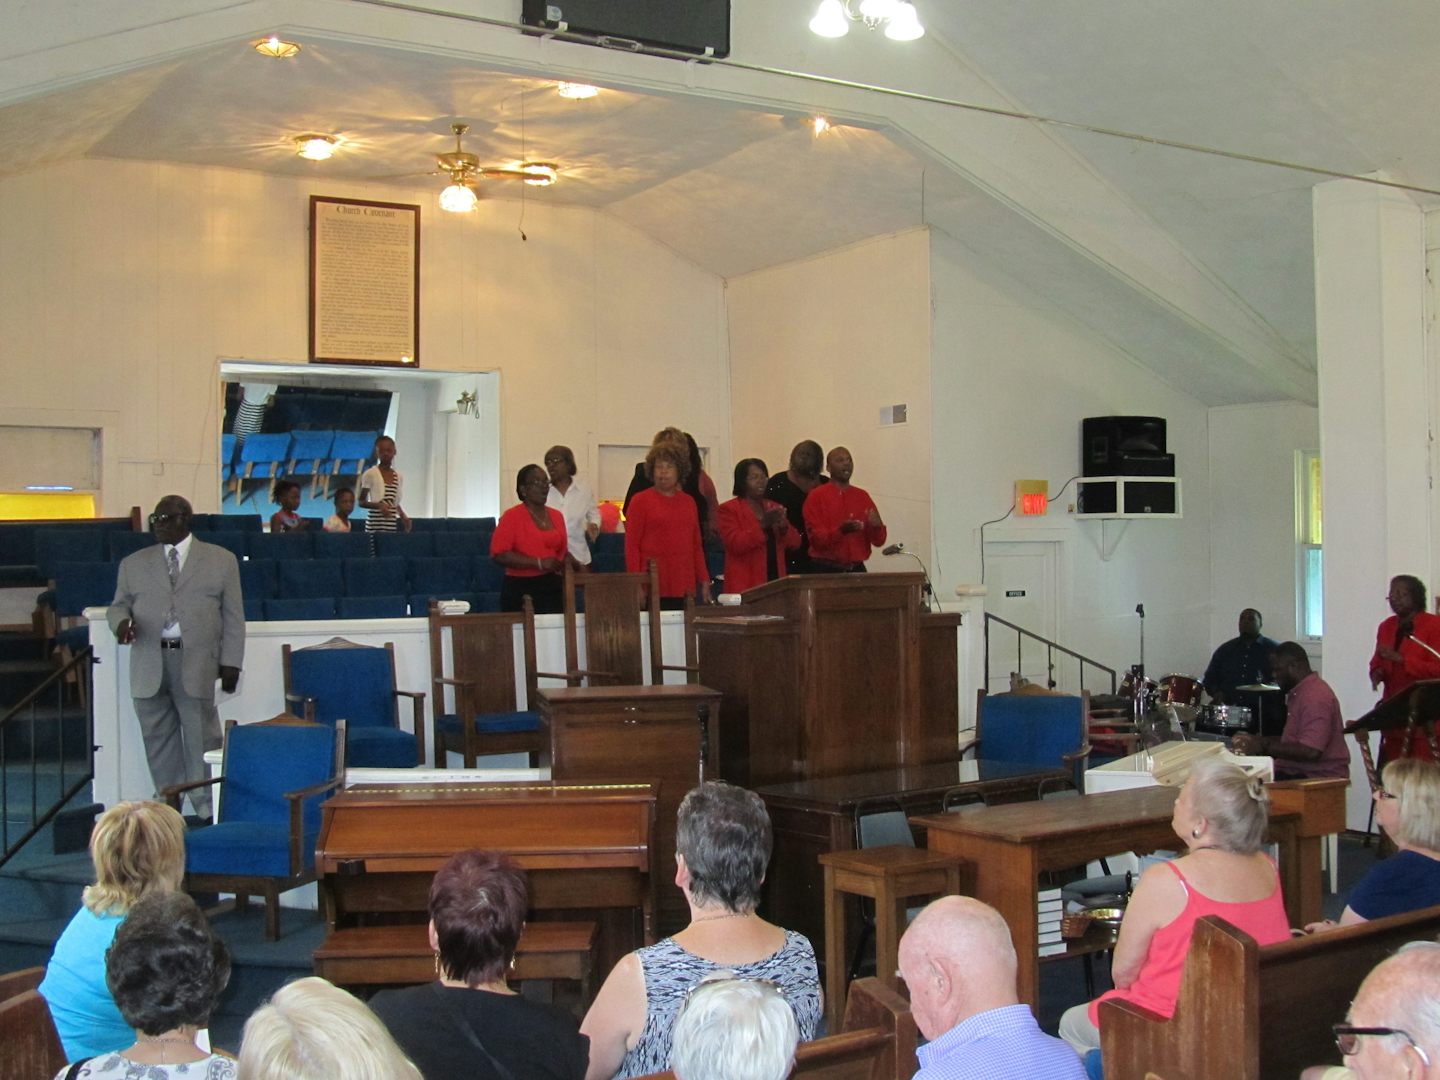 Church service at the greater First Baptist Church.